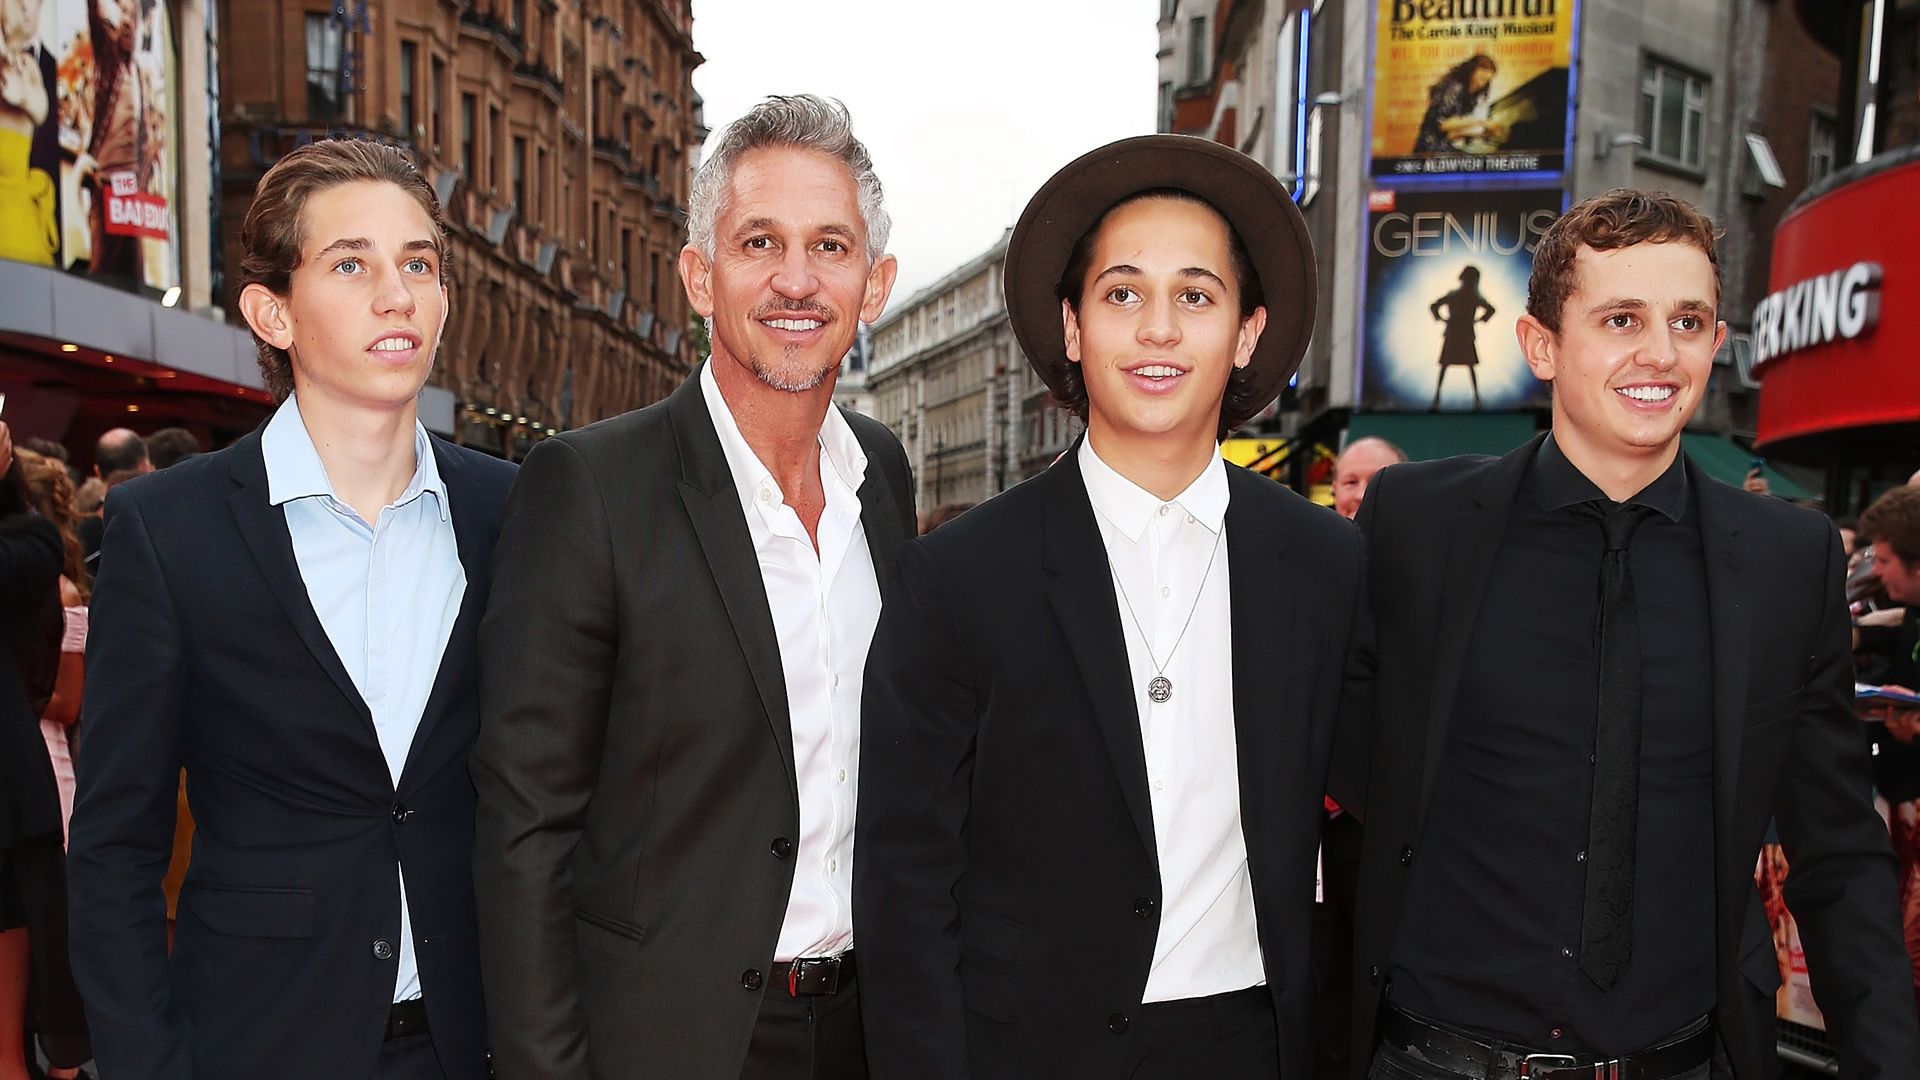 All about Gary Lineker's four sons: from near-death experience to DJ jobs